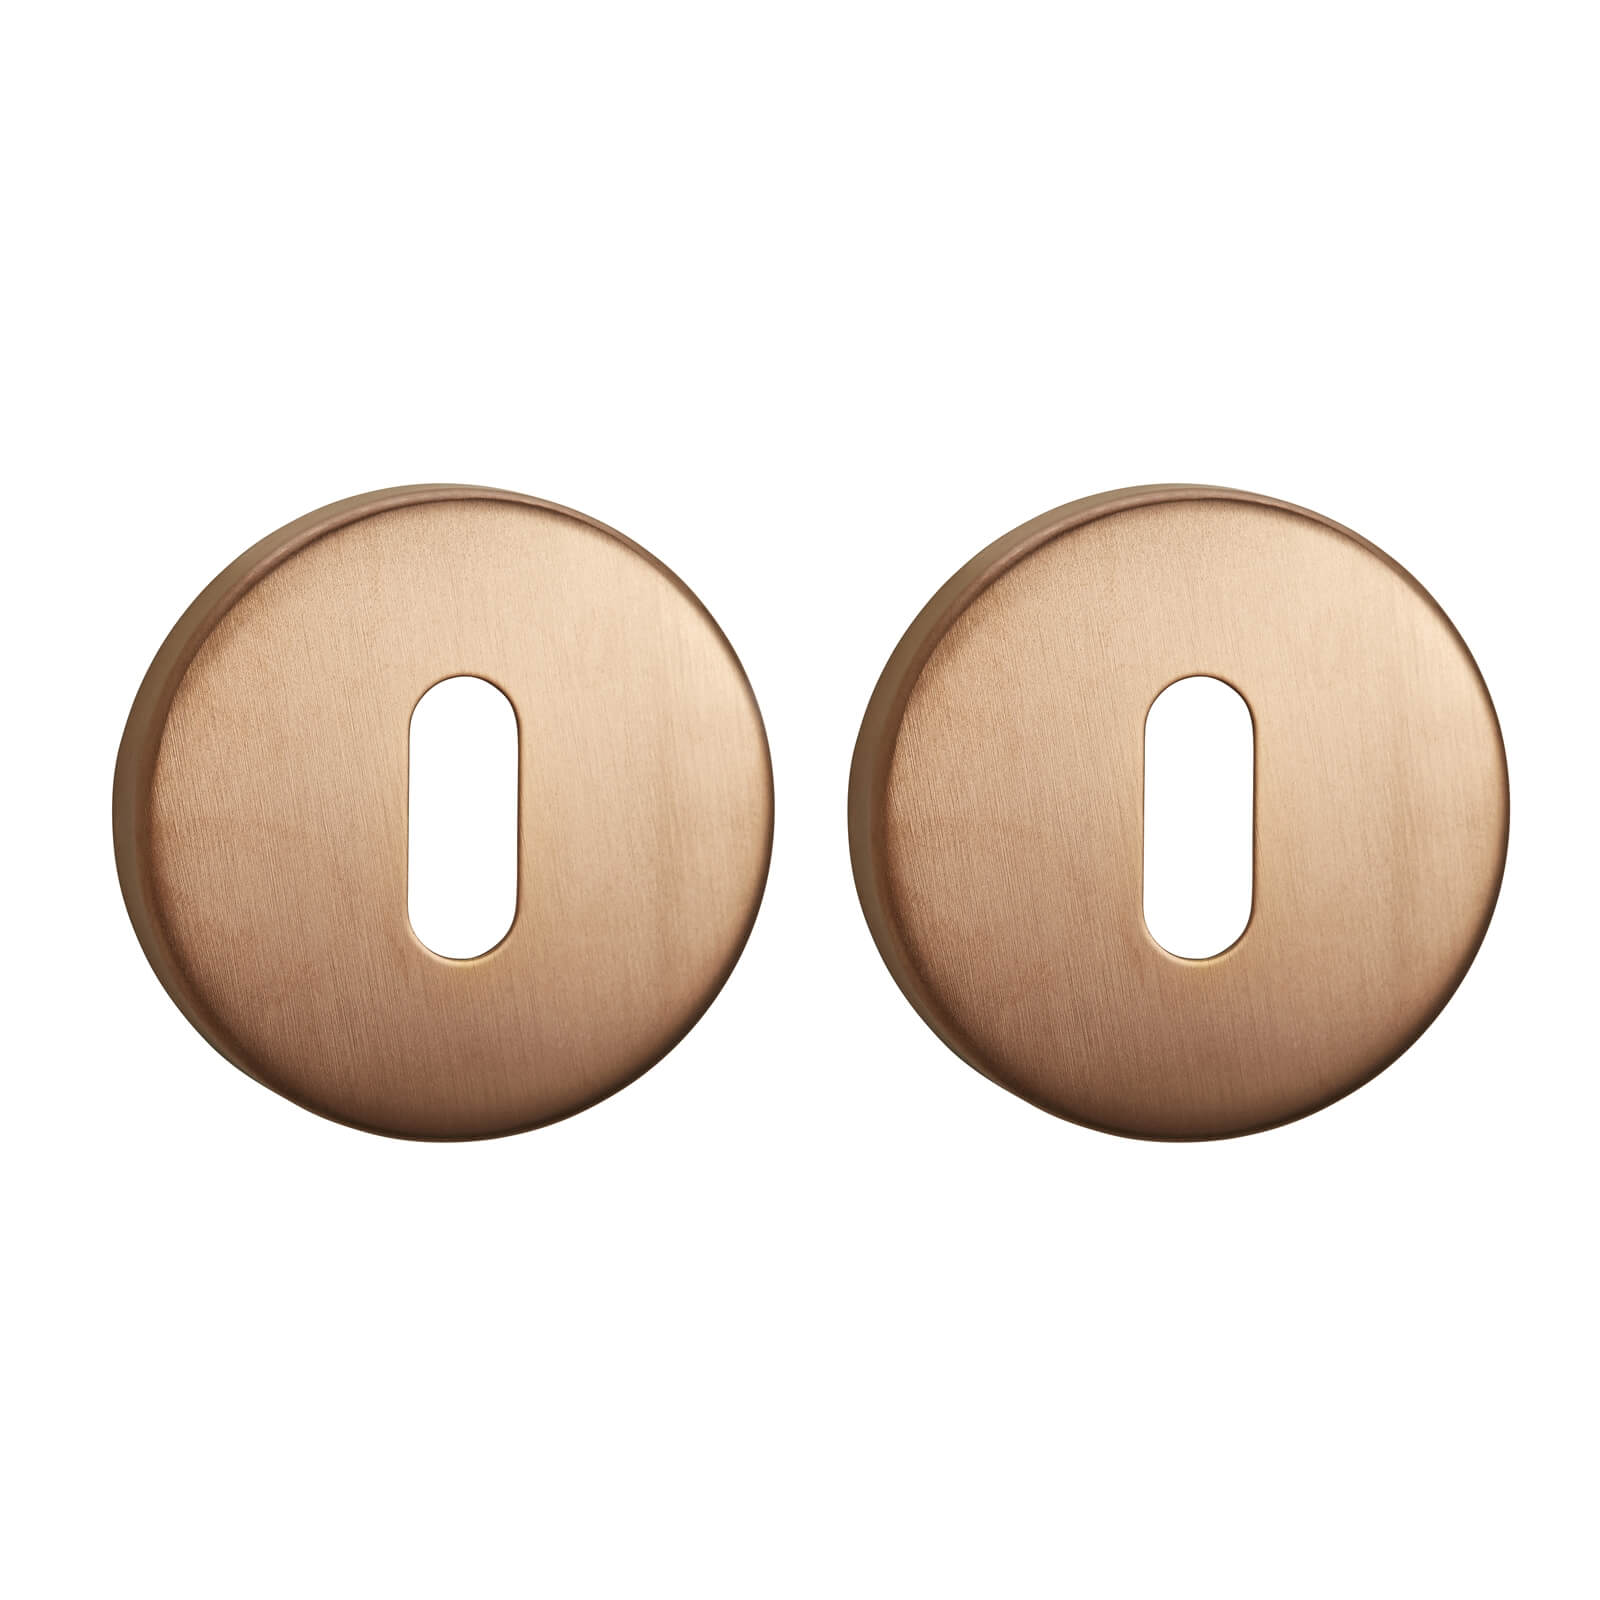 Sandleford Round Keyhole Escutcheon - Brushed Copper Stainless Steel